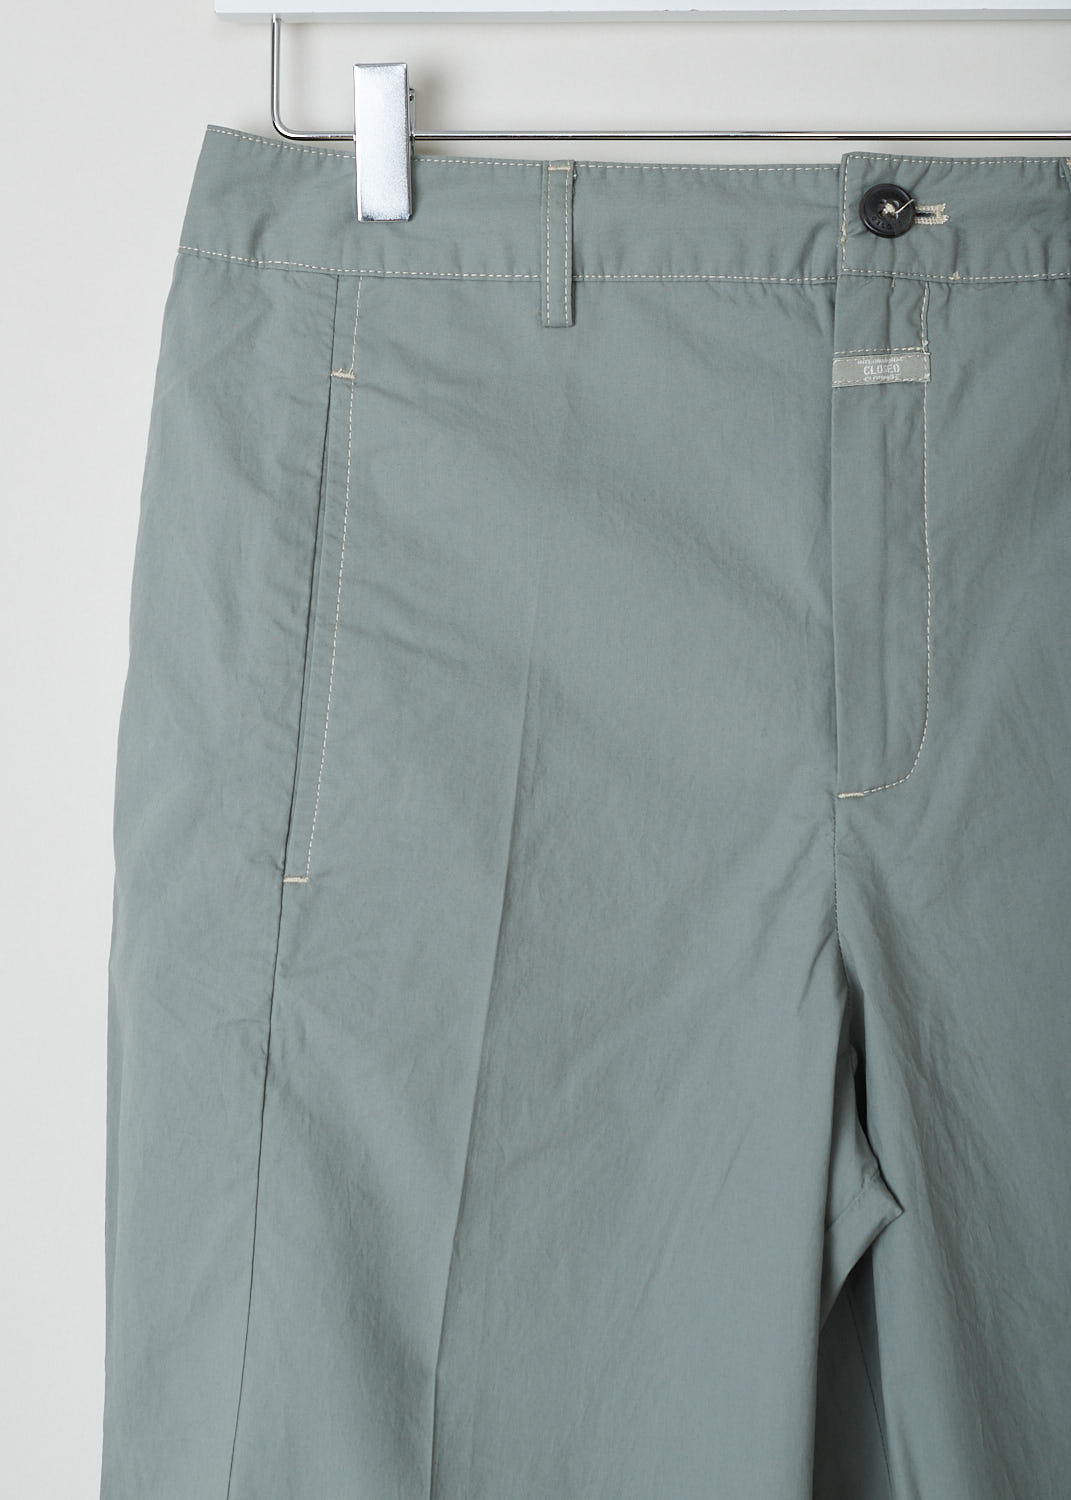 CLOSED, LIGHTWEIGHT GREY TROUSERS, LUDWIG_C91045_53A_22_691, Grey, Detail, These comfortable grey trousers feature a regular length, two forward slanted pockets on the front and two welt pockets on the back.